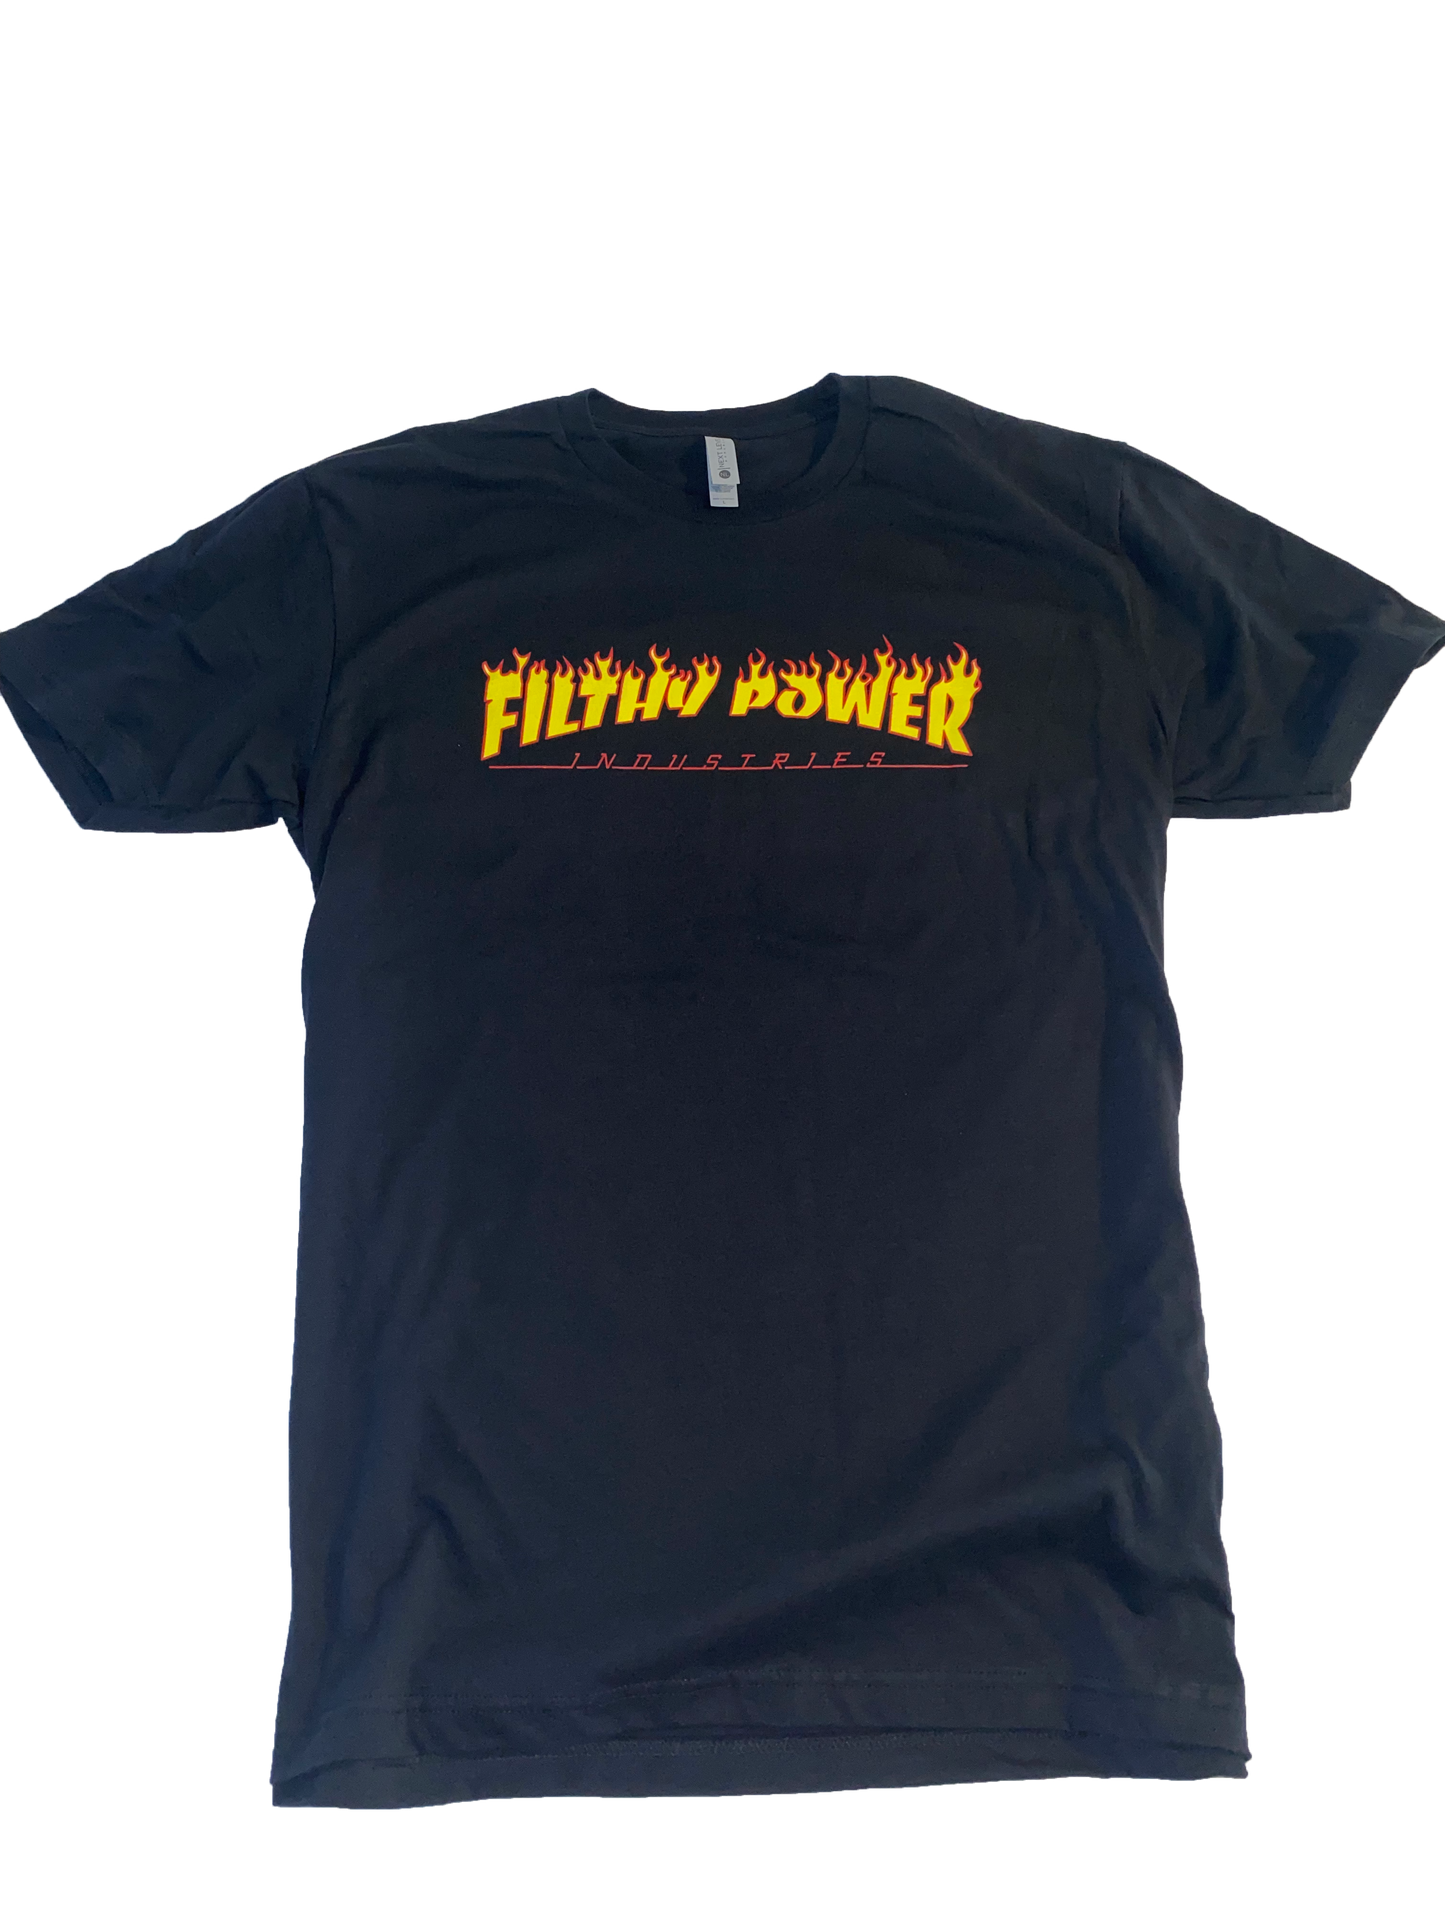 Filthy Power Industries T-shirt